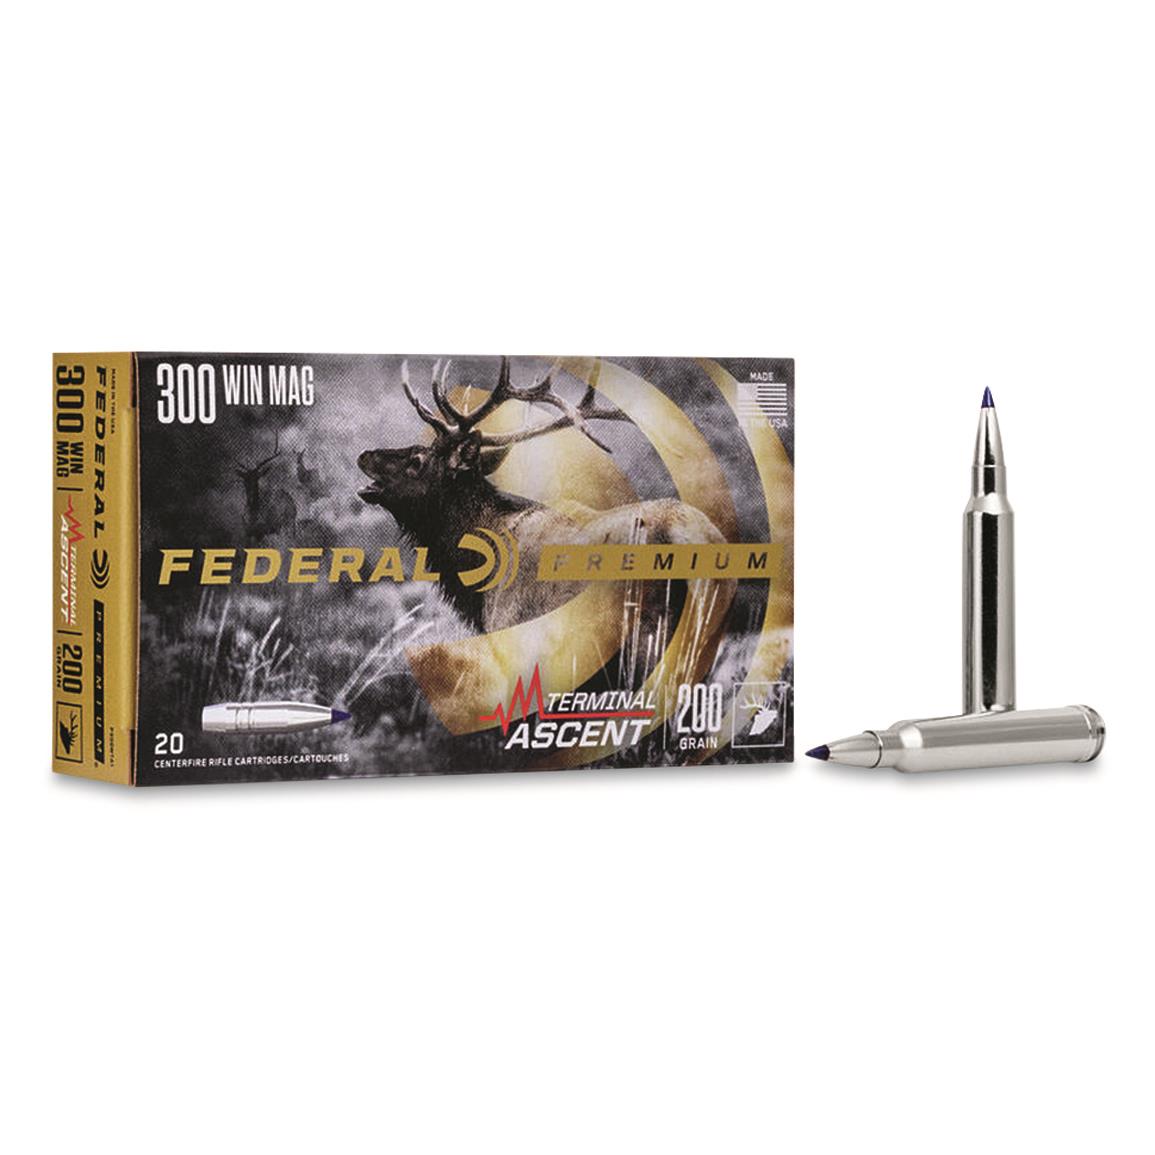 Federal Premium Terminal Ascent, .300 Win. Mag., Bonded Polymer Tip, 200 Grain, 20 Rounds